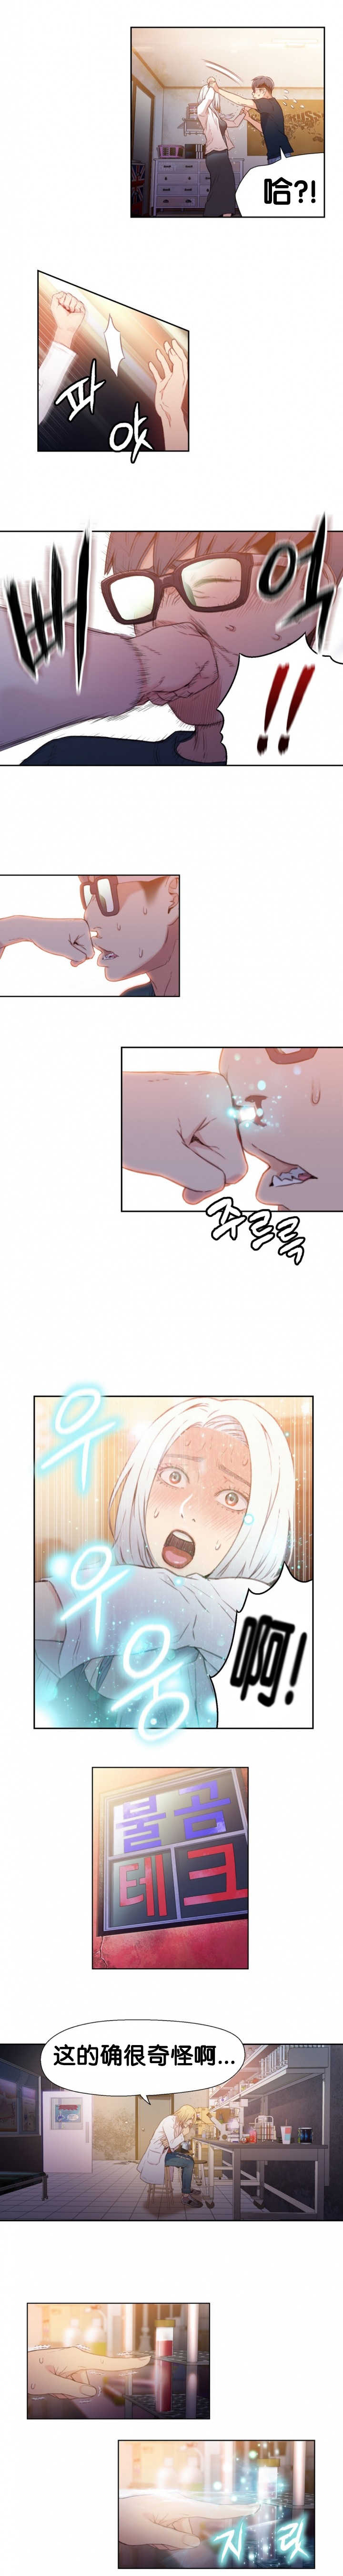 [BAK Hyeong Jun]Sweet Guy Ch.10-12(Chinese)(FITHRPG6) - Page 32